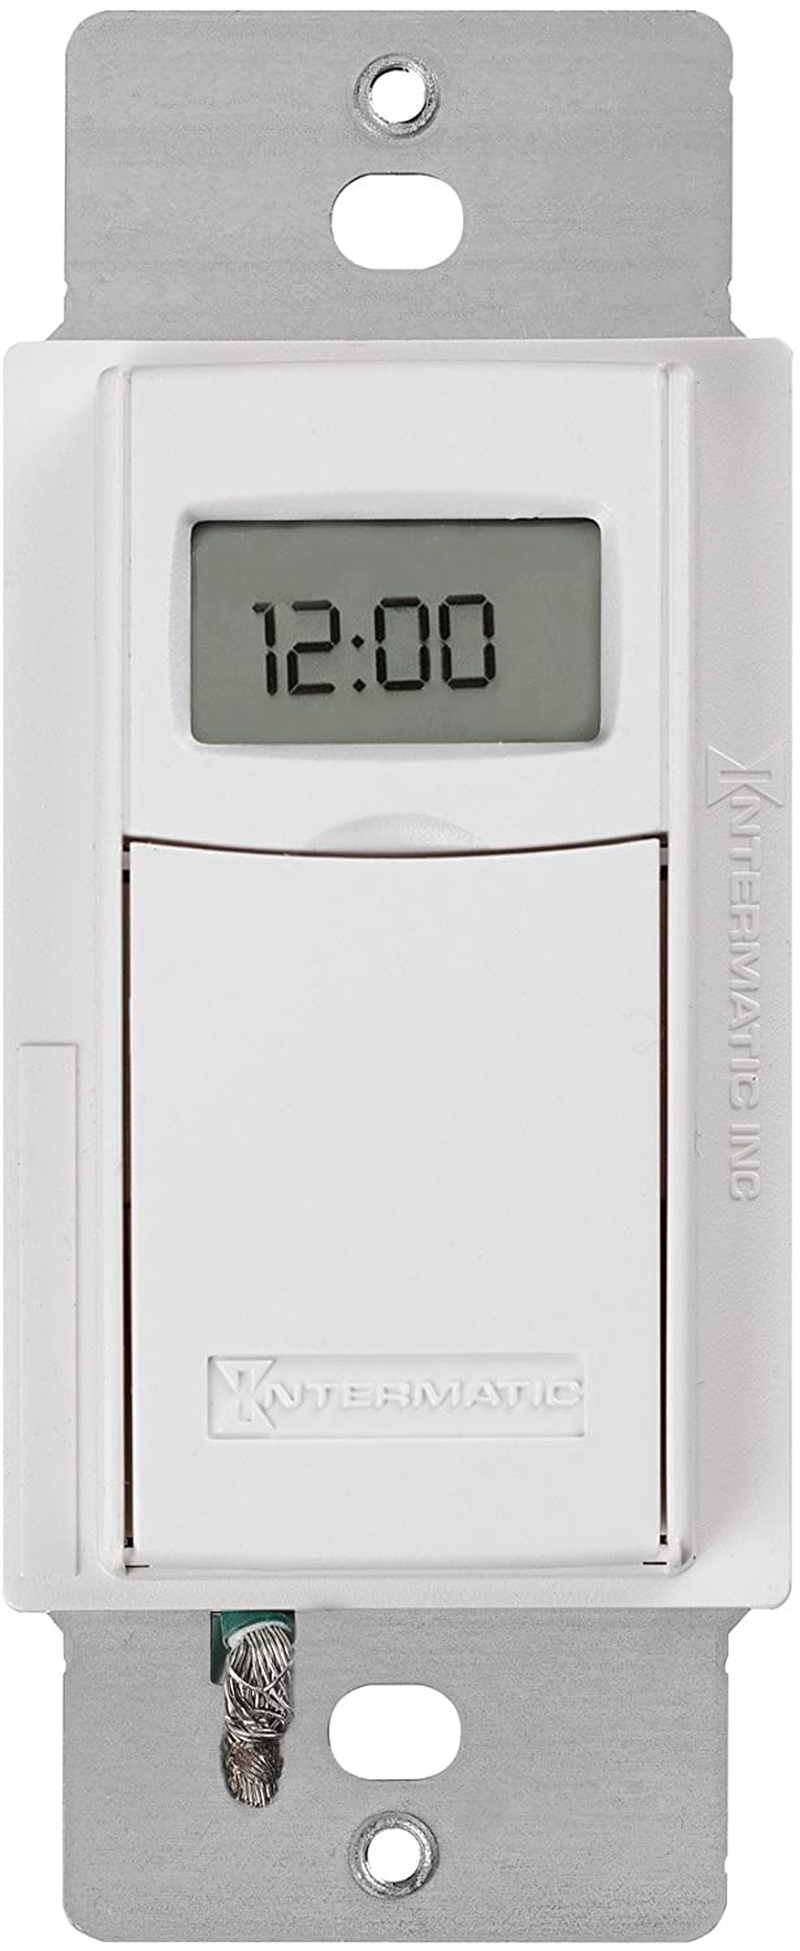 Intermatic ST01 7 Day Programmable In Wall Digital Timer Switch for Lights and Appliances, Astronomic, Self Adjusting, Heavy Duty,White